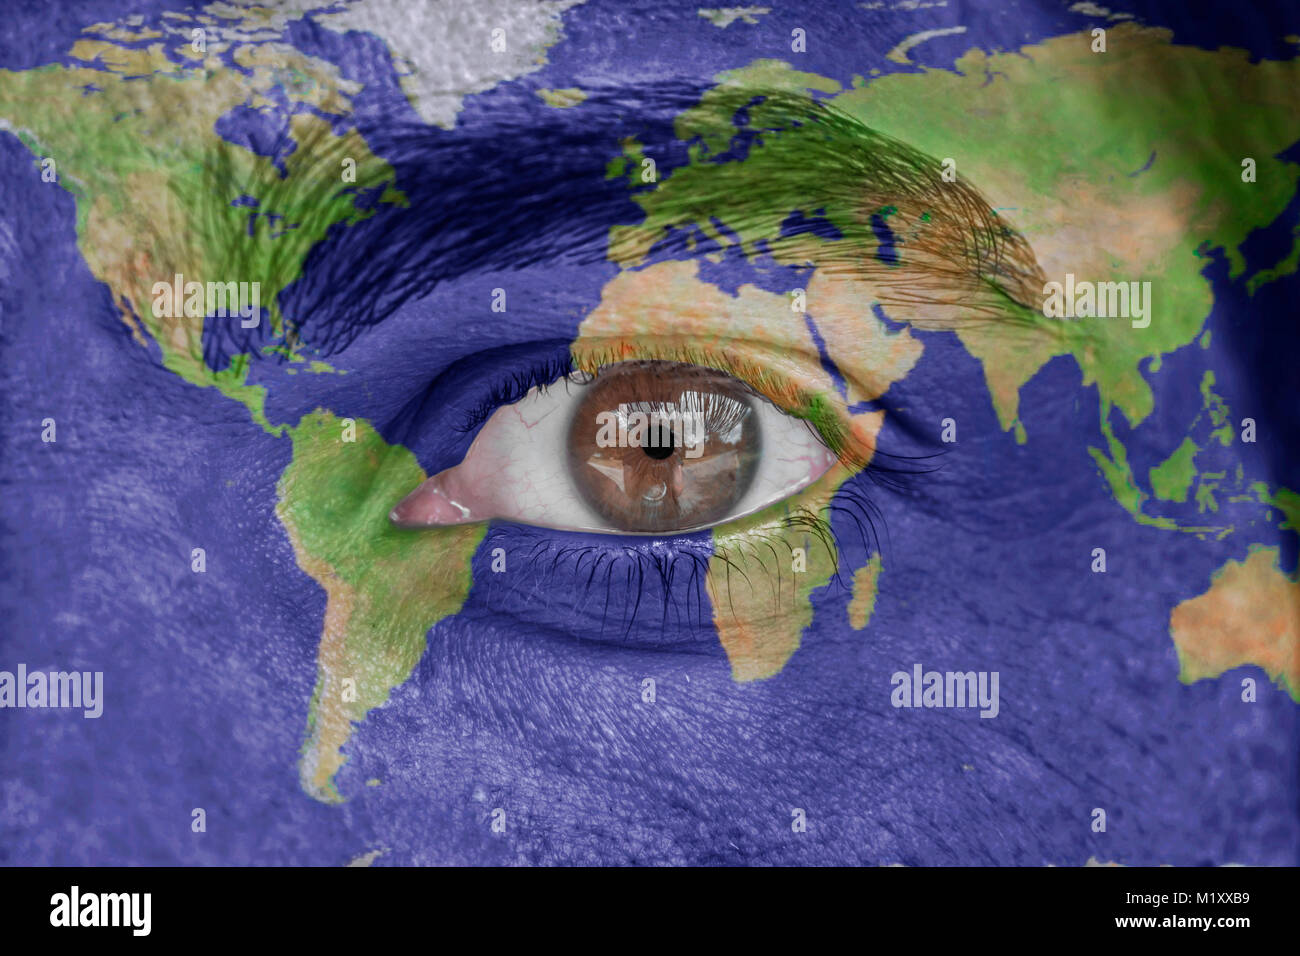 Human face and eye painted with world space geography map Stock Photo